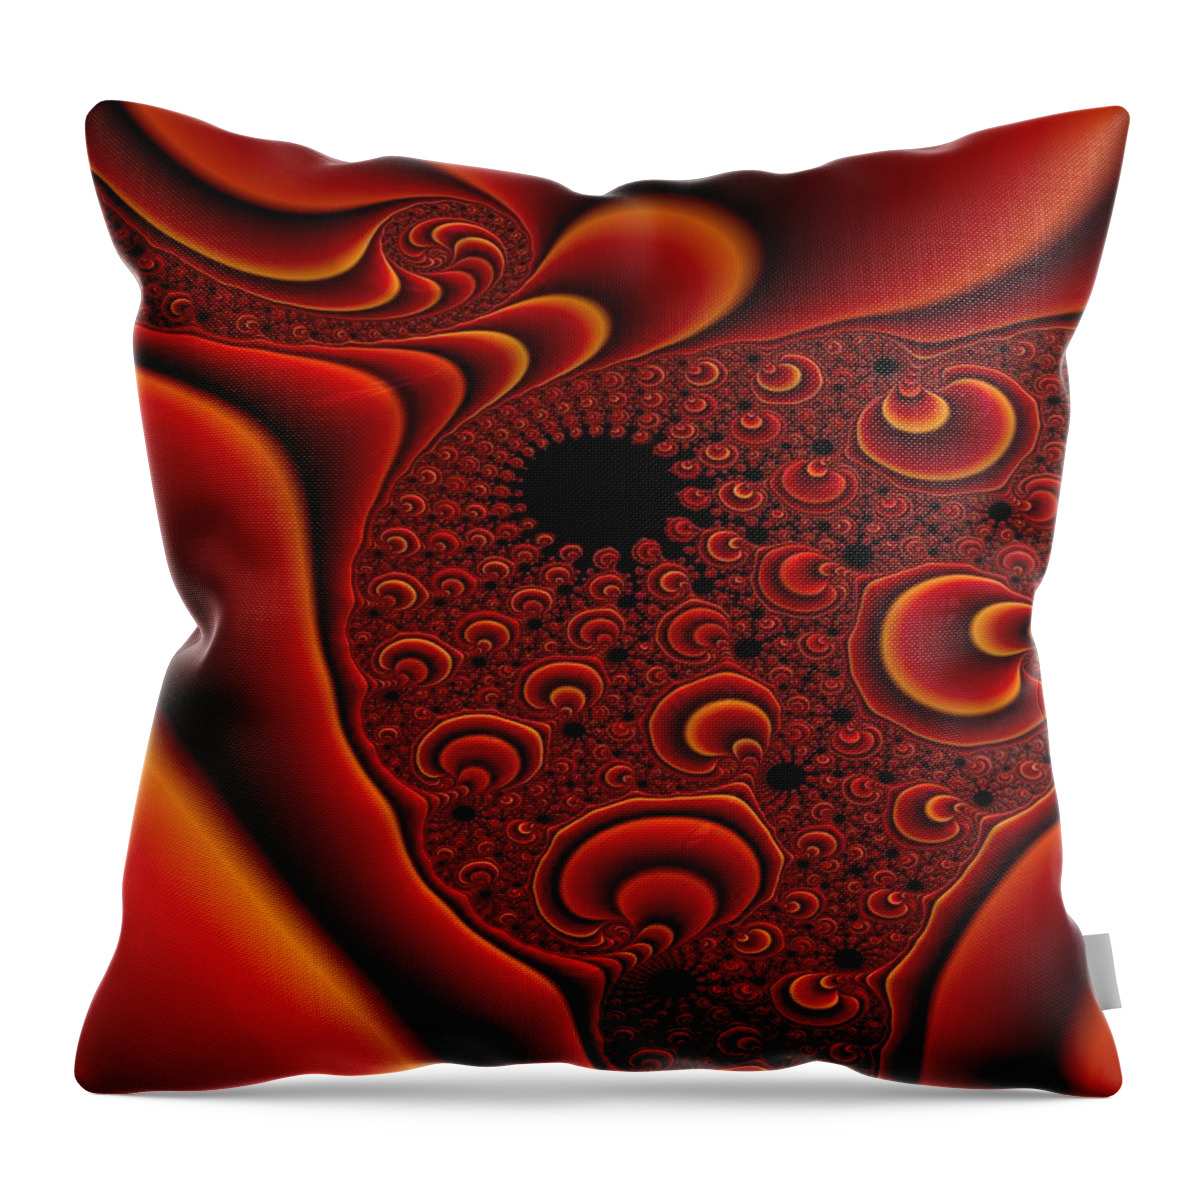 Fractal Design Throw Pillow featuring the digital art Ray of Hope by Bonnie Bruno